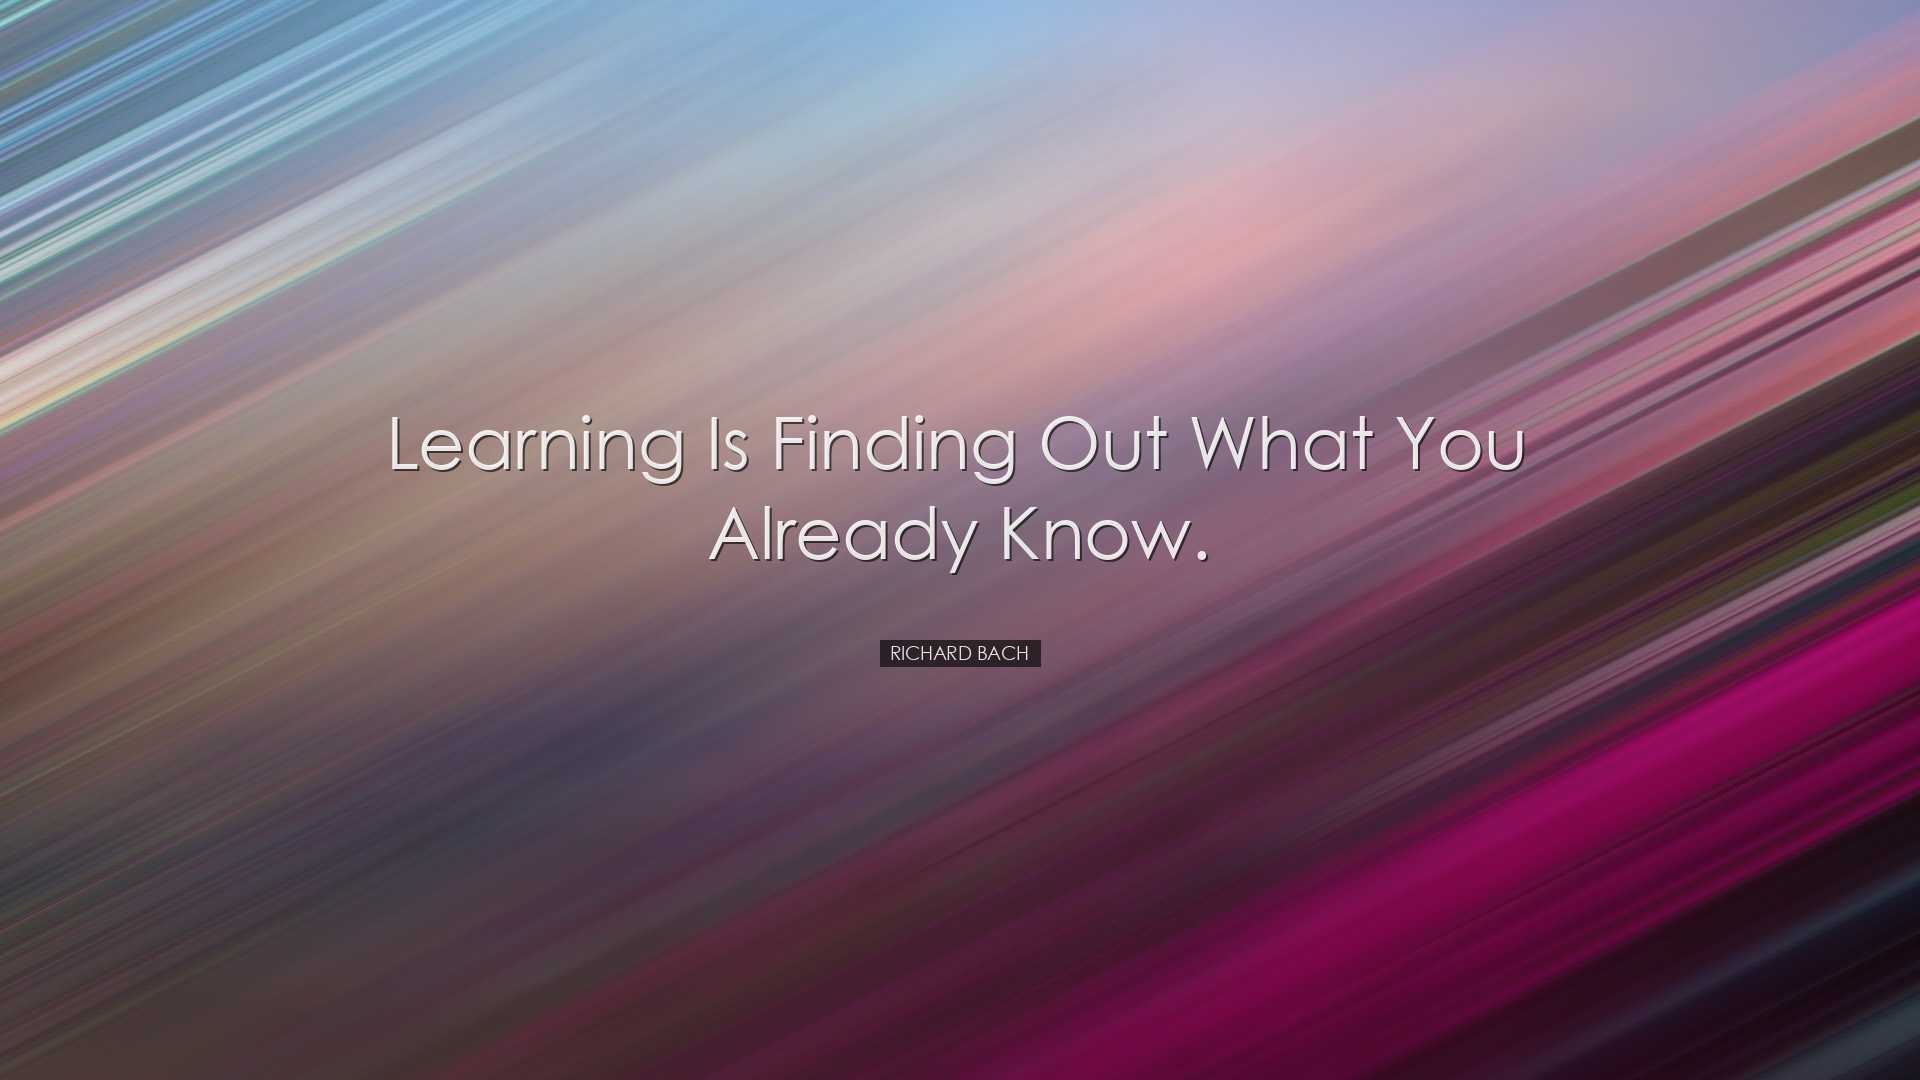 Learning is finding out what you already know. - Richard Bach